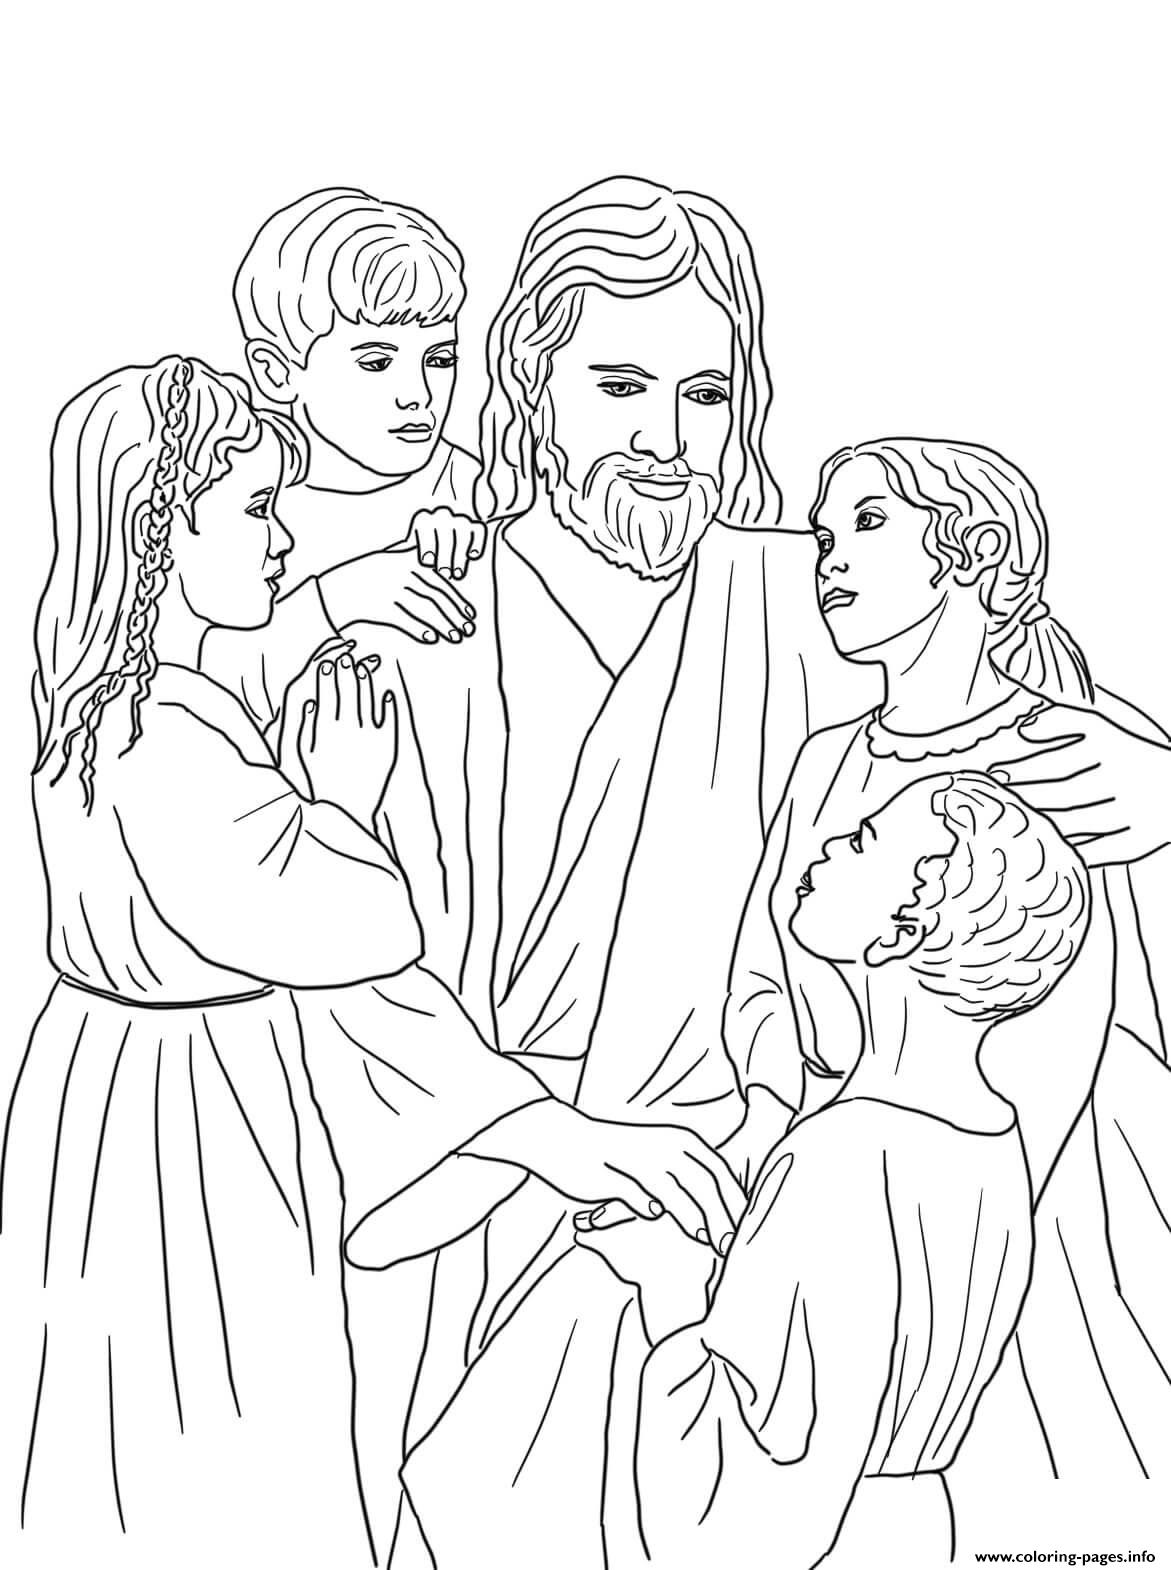 jesus-loves-all-the-children-coloring-page-printable